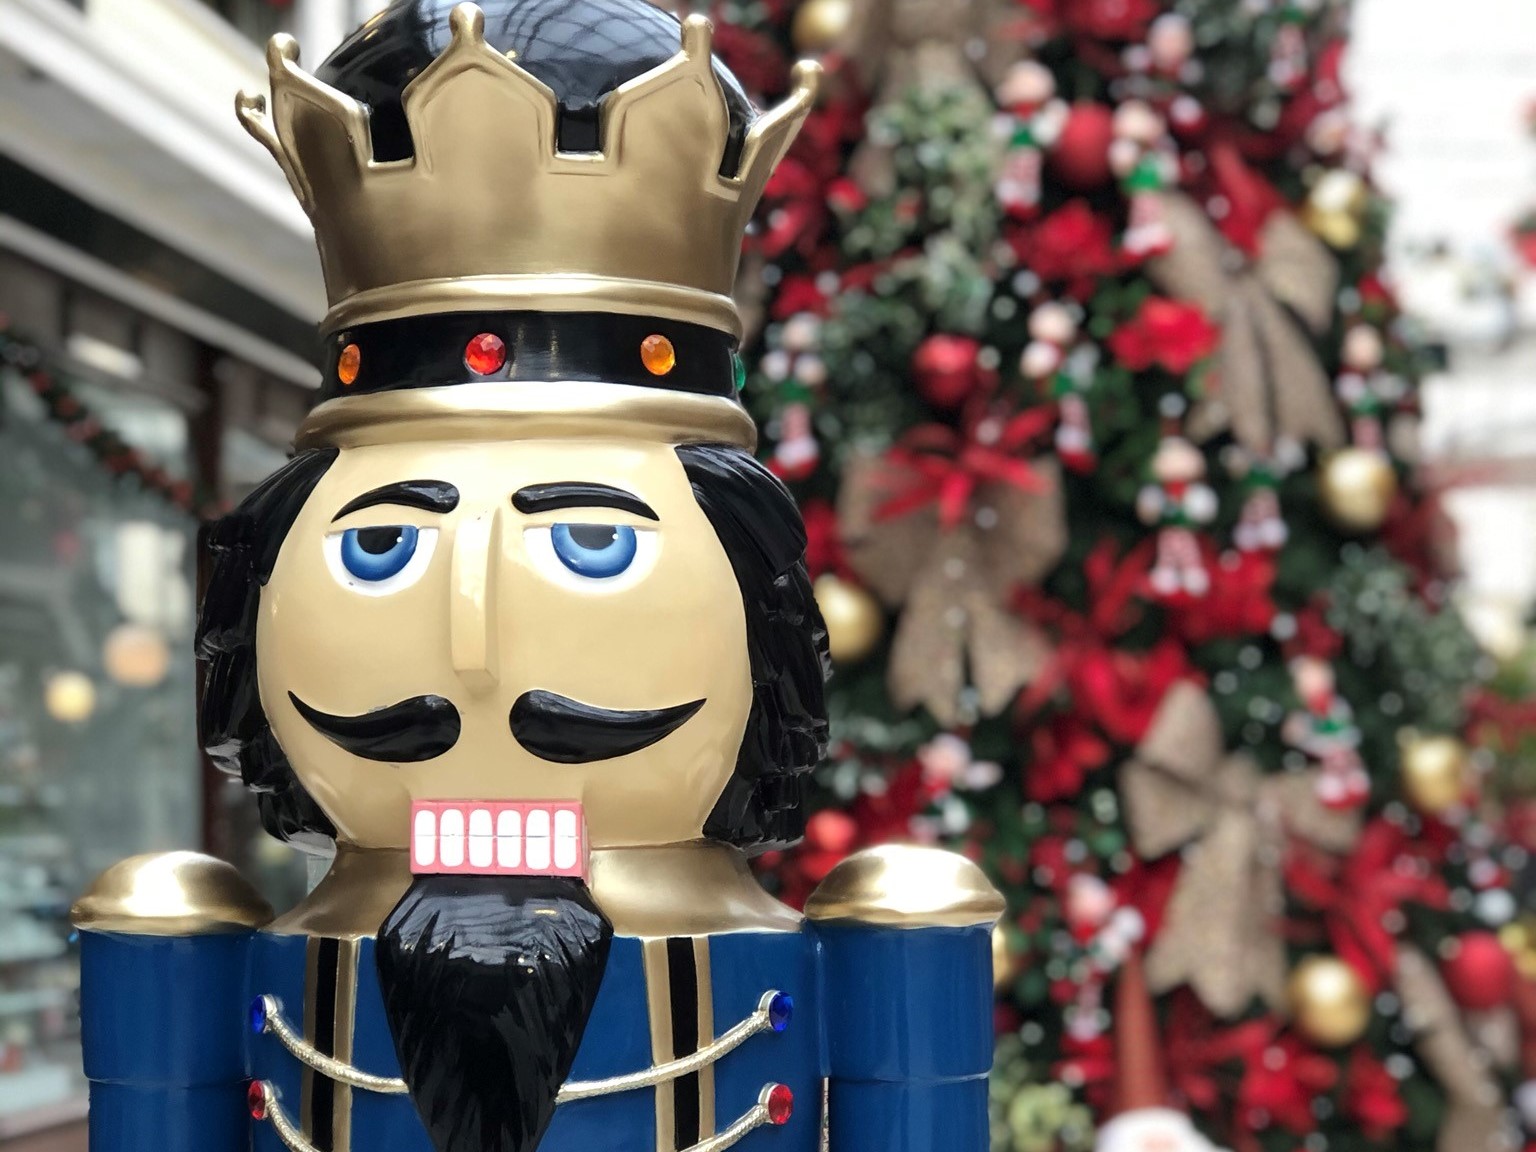 Nutcracker figure, part of Christmas in Southport